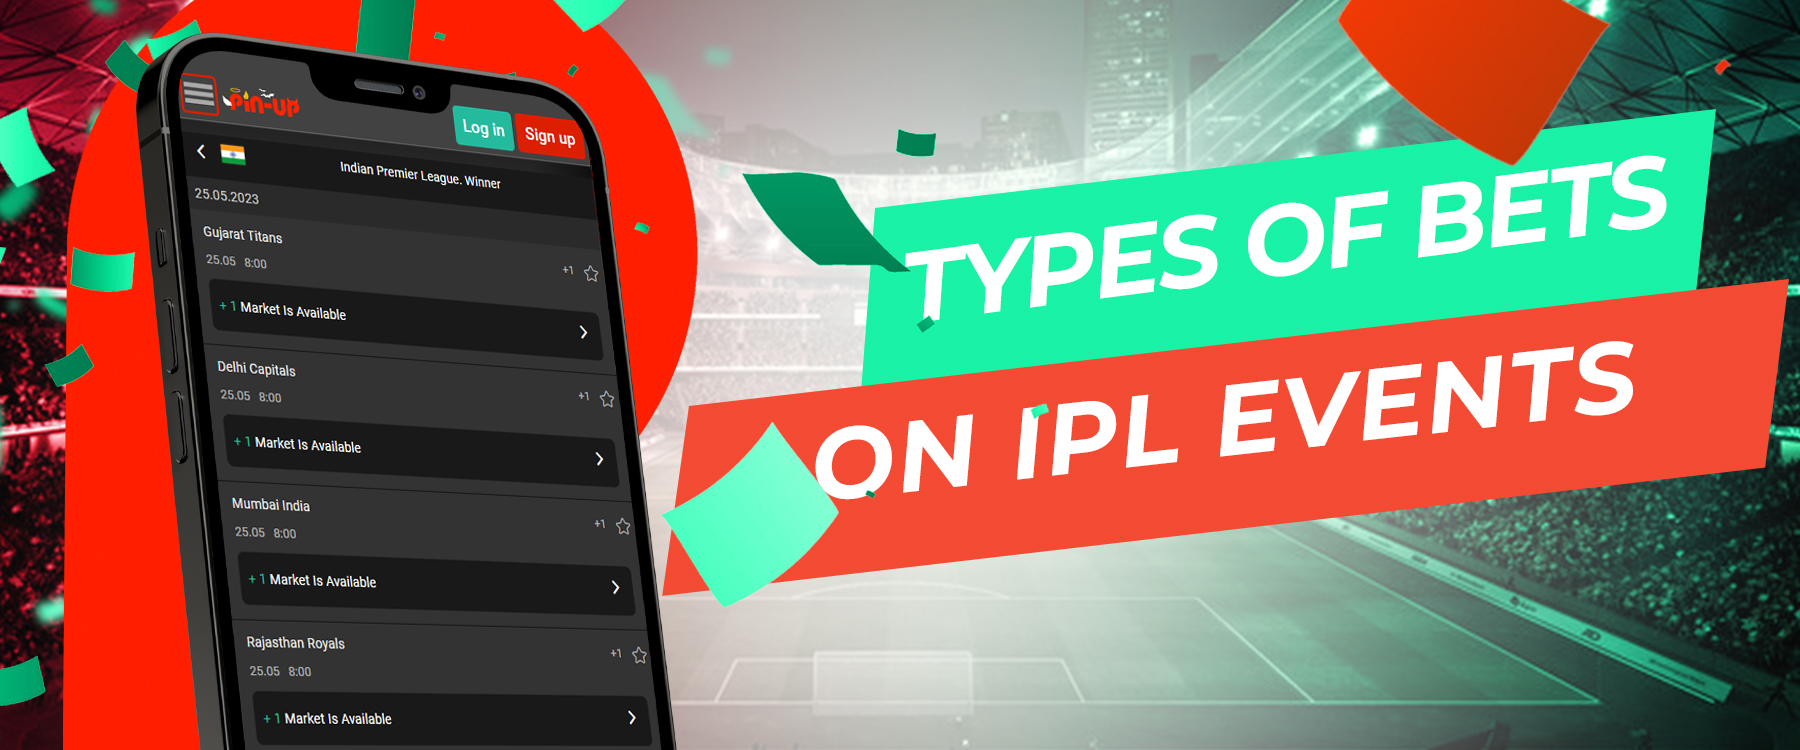 The types of IPL bets available to Indian users on Pin Up